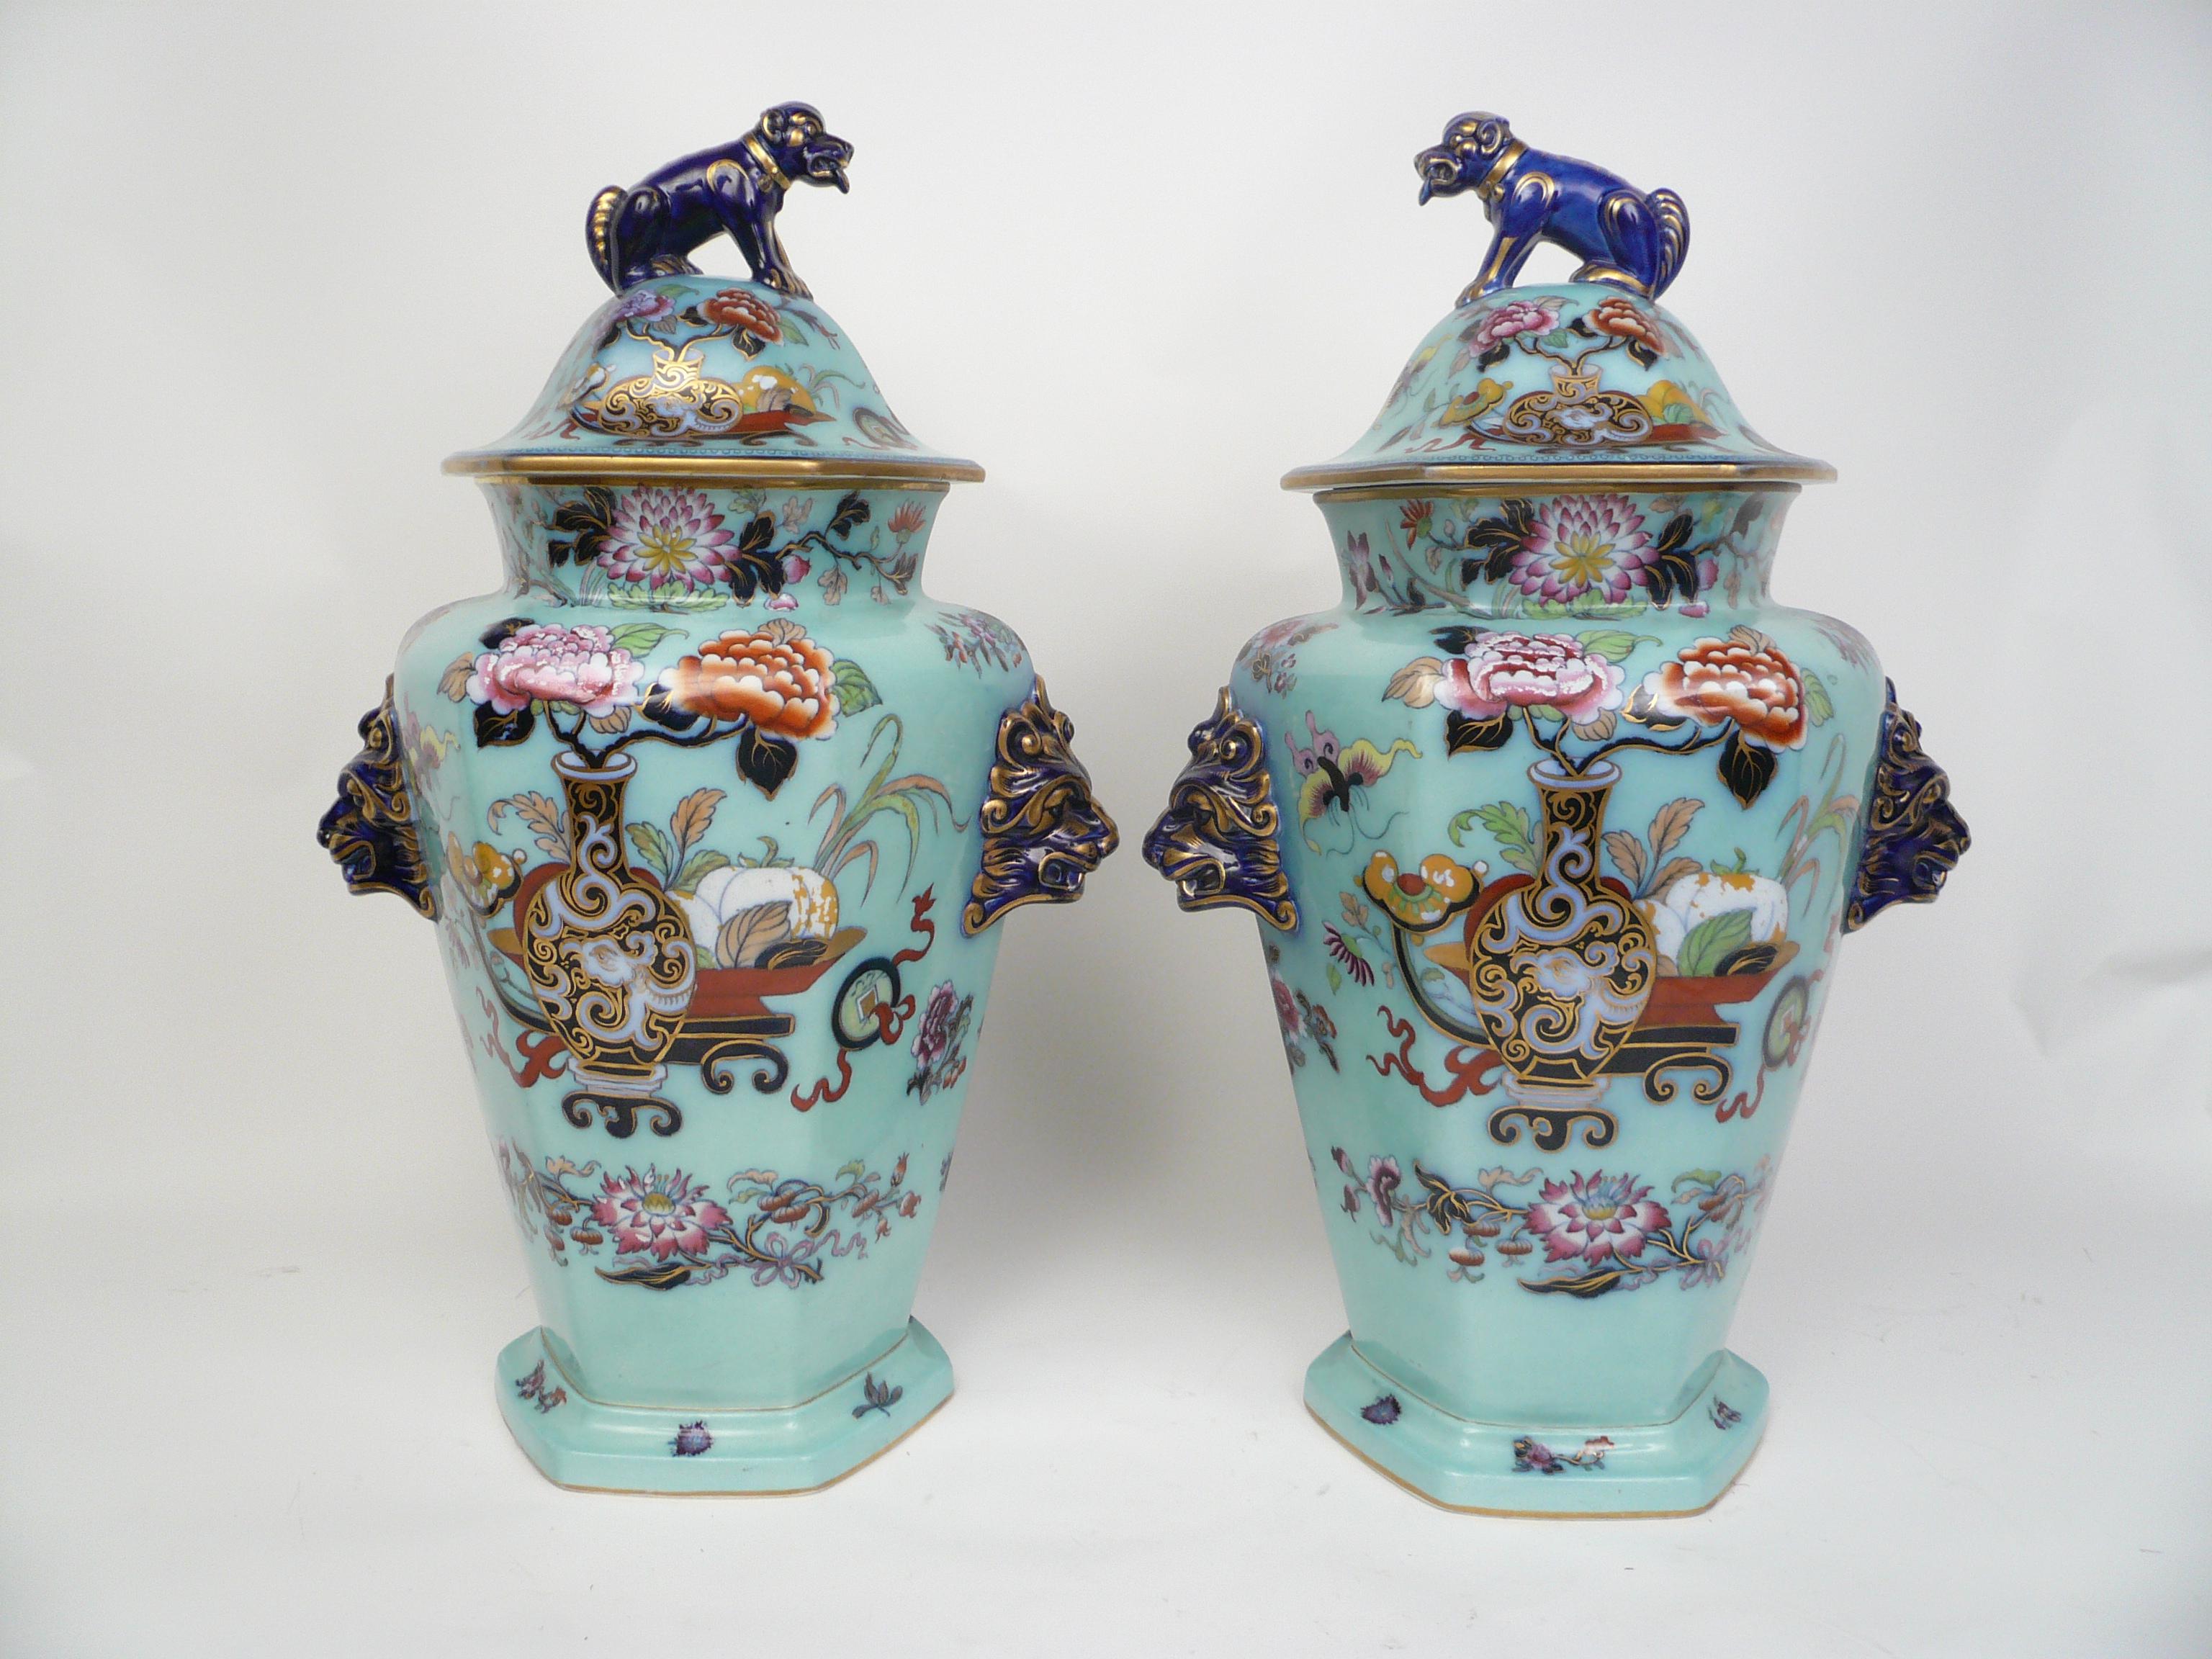 This impressive pair of hexagonal urns and covers are hand painted in the Imari palette, and feature floral decoration. Each vase has gilt highlighted vases, peonies, lion head handles, and Foo dog finials.